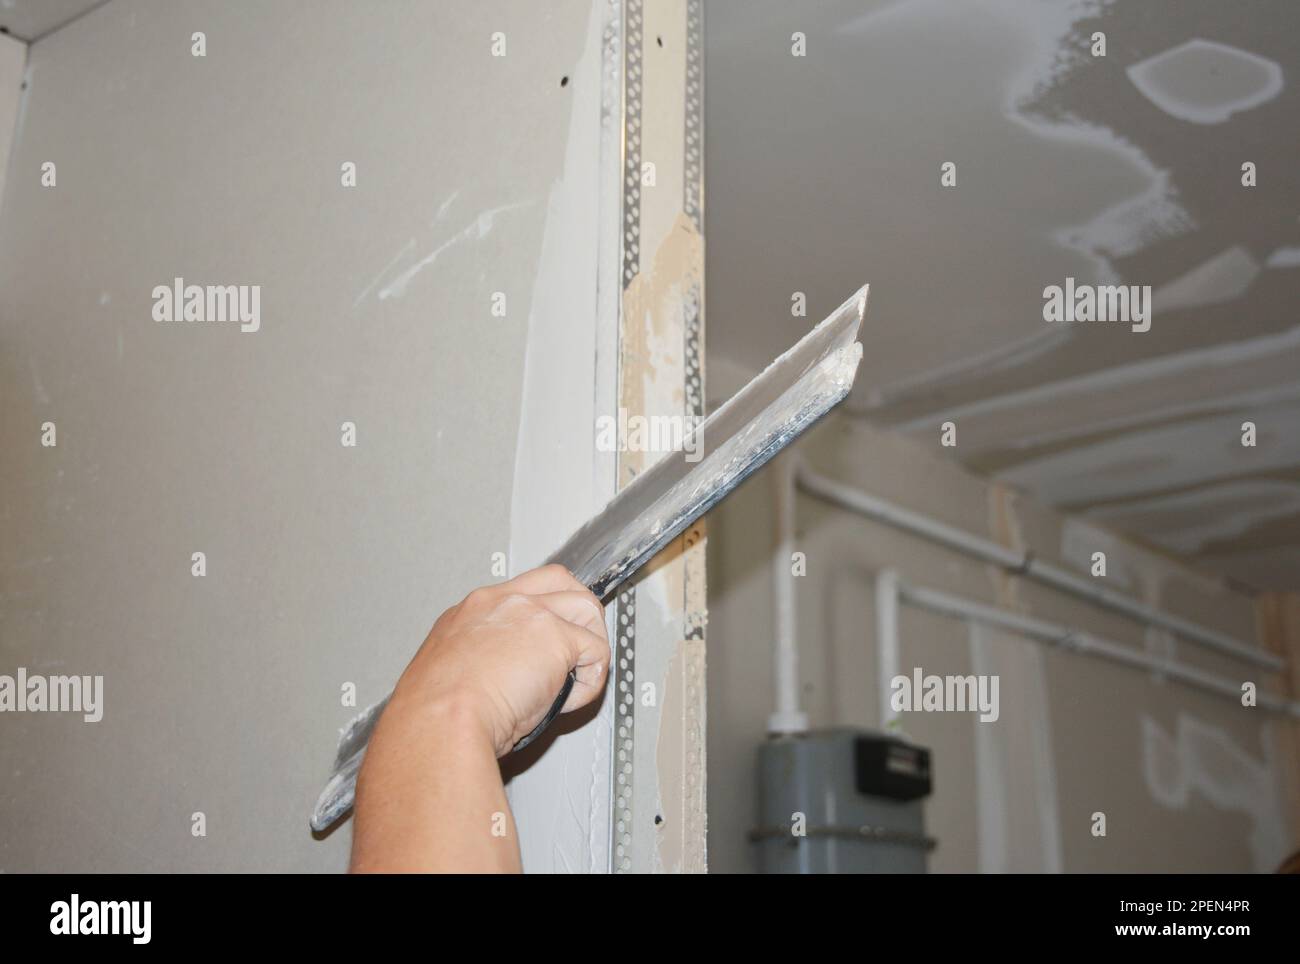 Builder plastering, skim coating, finishing, applying the first coat of plaster on a drywall partition wall  during house renovation. Stock Photo